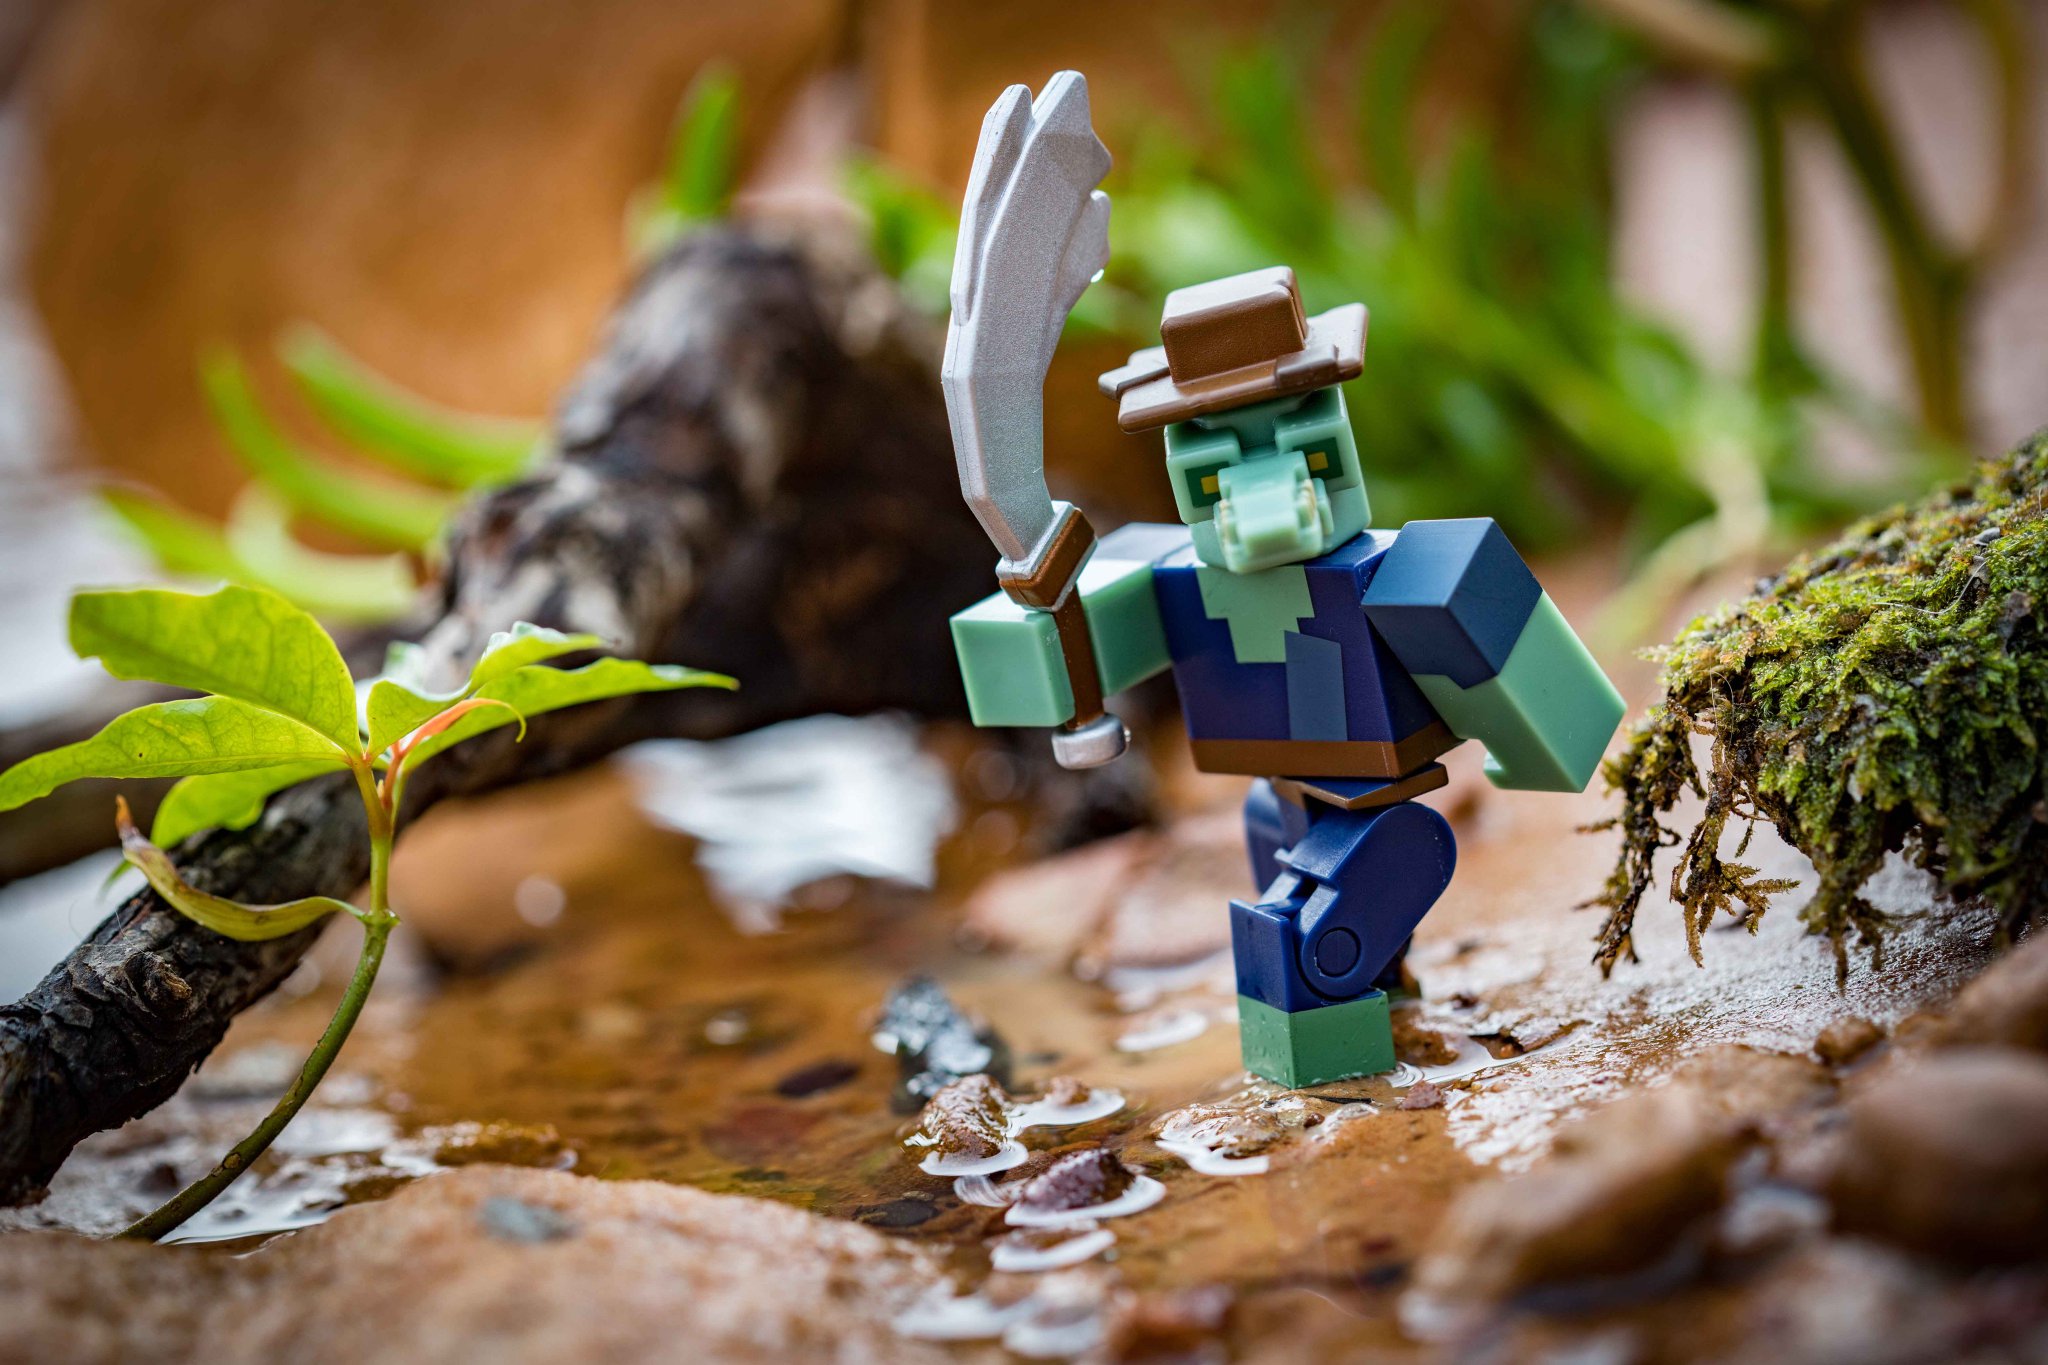 Spectraboxrblx On Twitter I M Happy To Announce That The Fantastic Frontier Roblox Toys Are Officially Here The Croc Figure Is The First Of Two Toys To Arrive And Is Now Hitting The - razer gold on twitter roblox series 3 mystery box toys